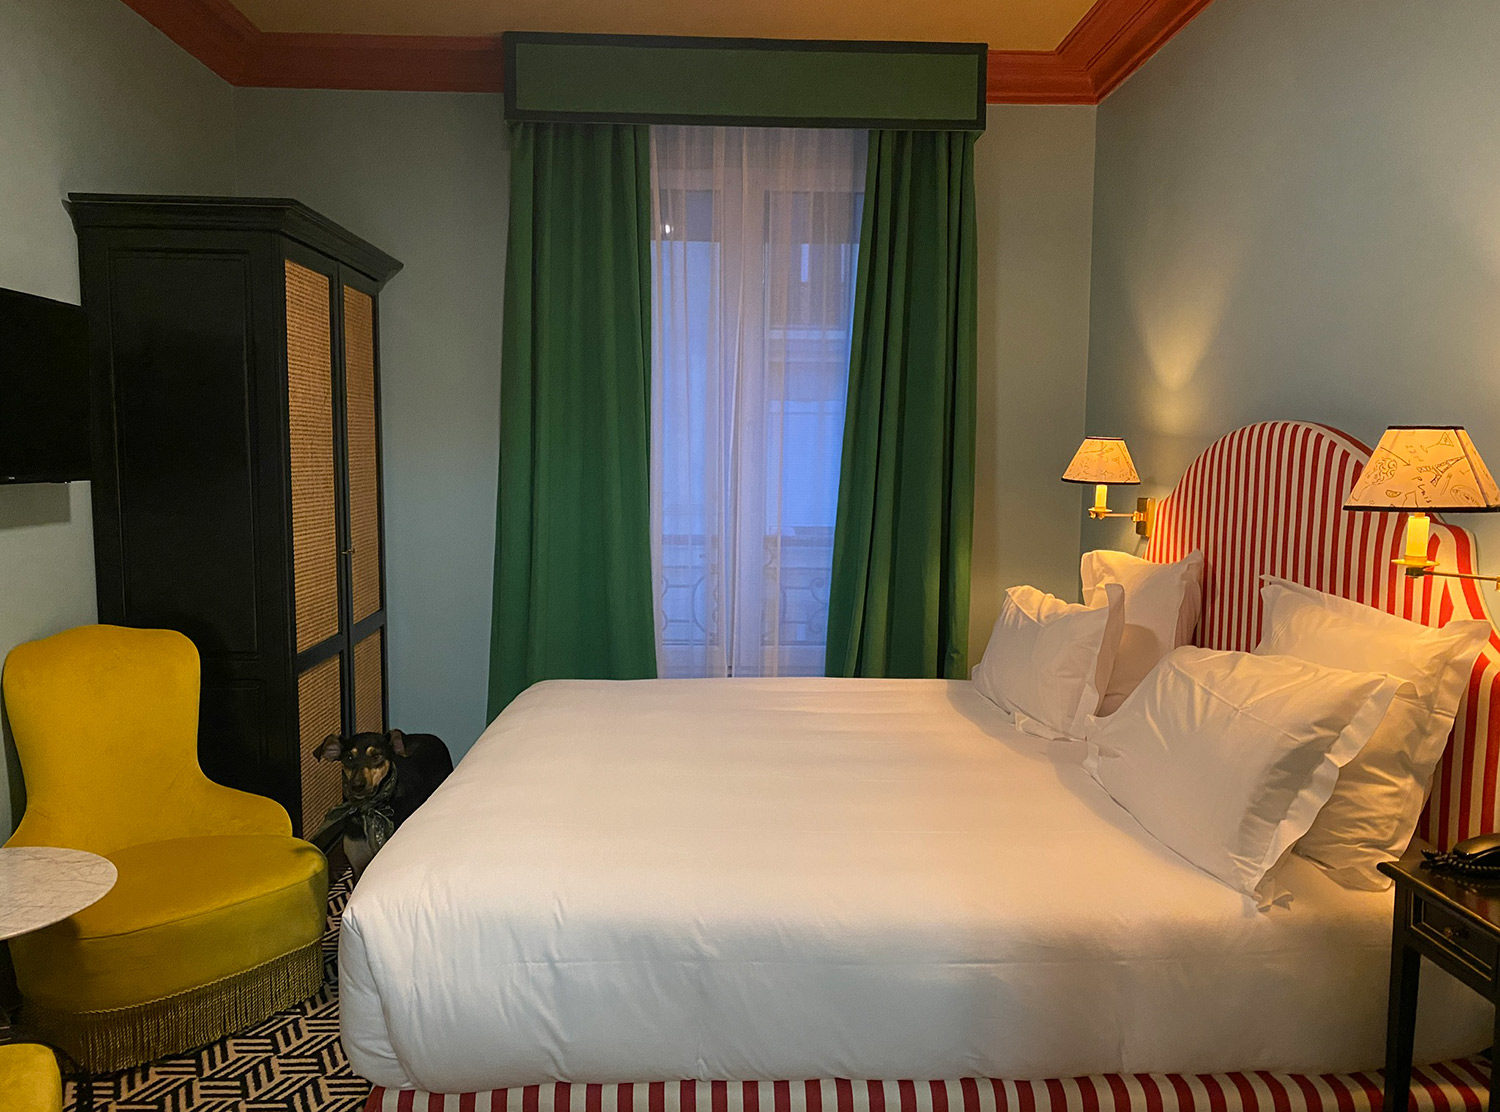 Hotel Les Deux Gares True Parisian style, the rooms are snug — but so, so nicely designed